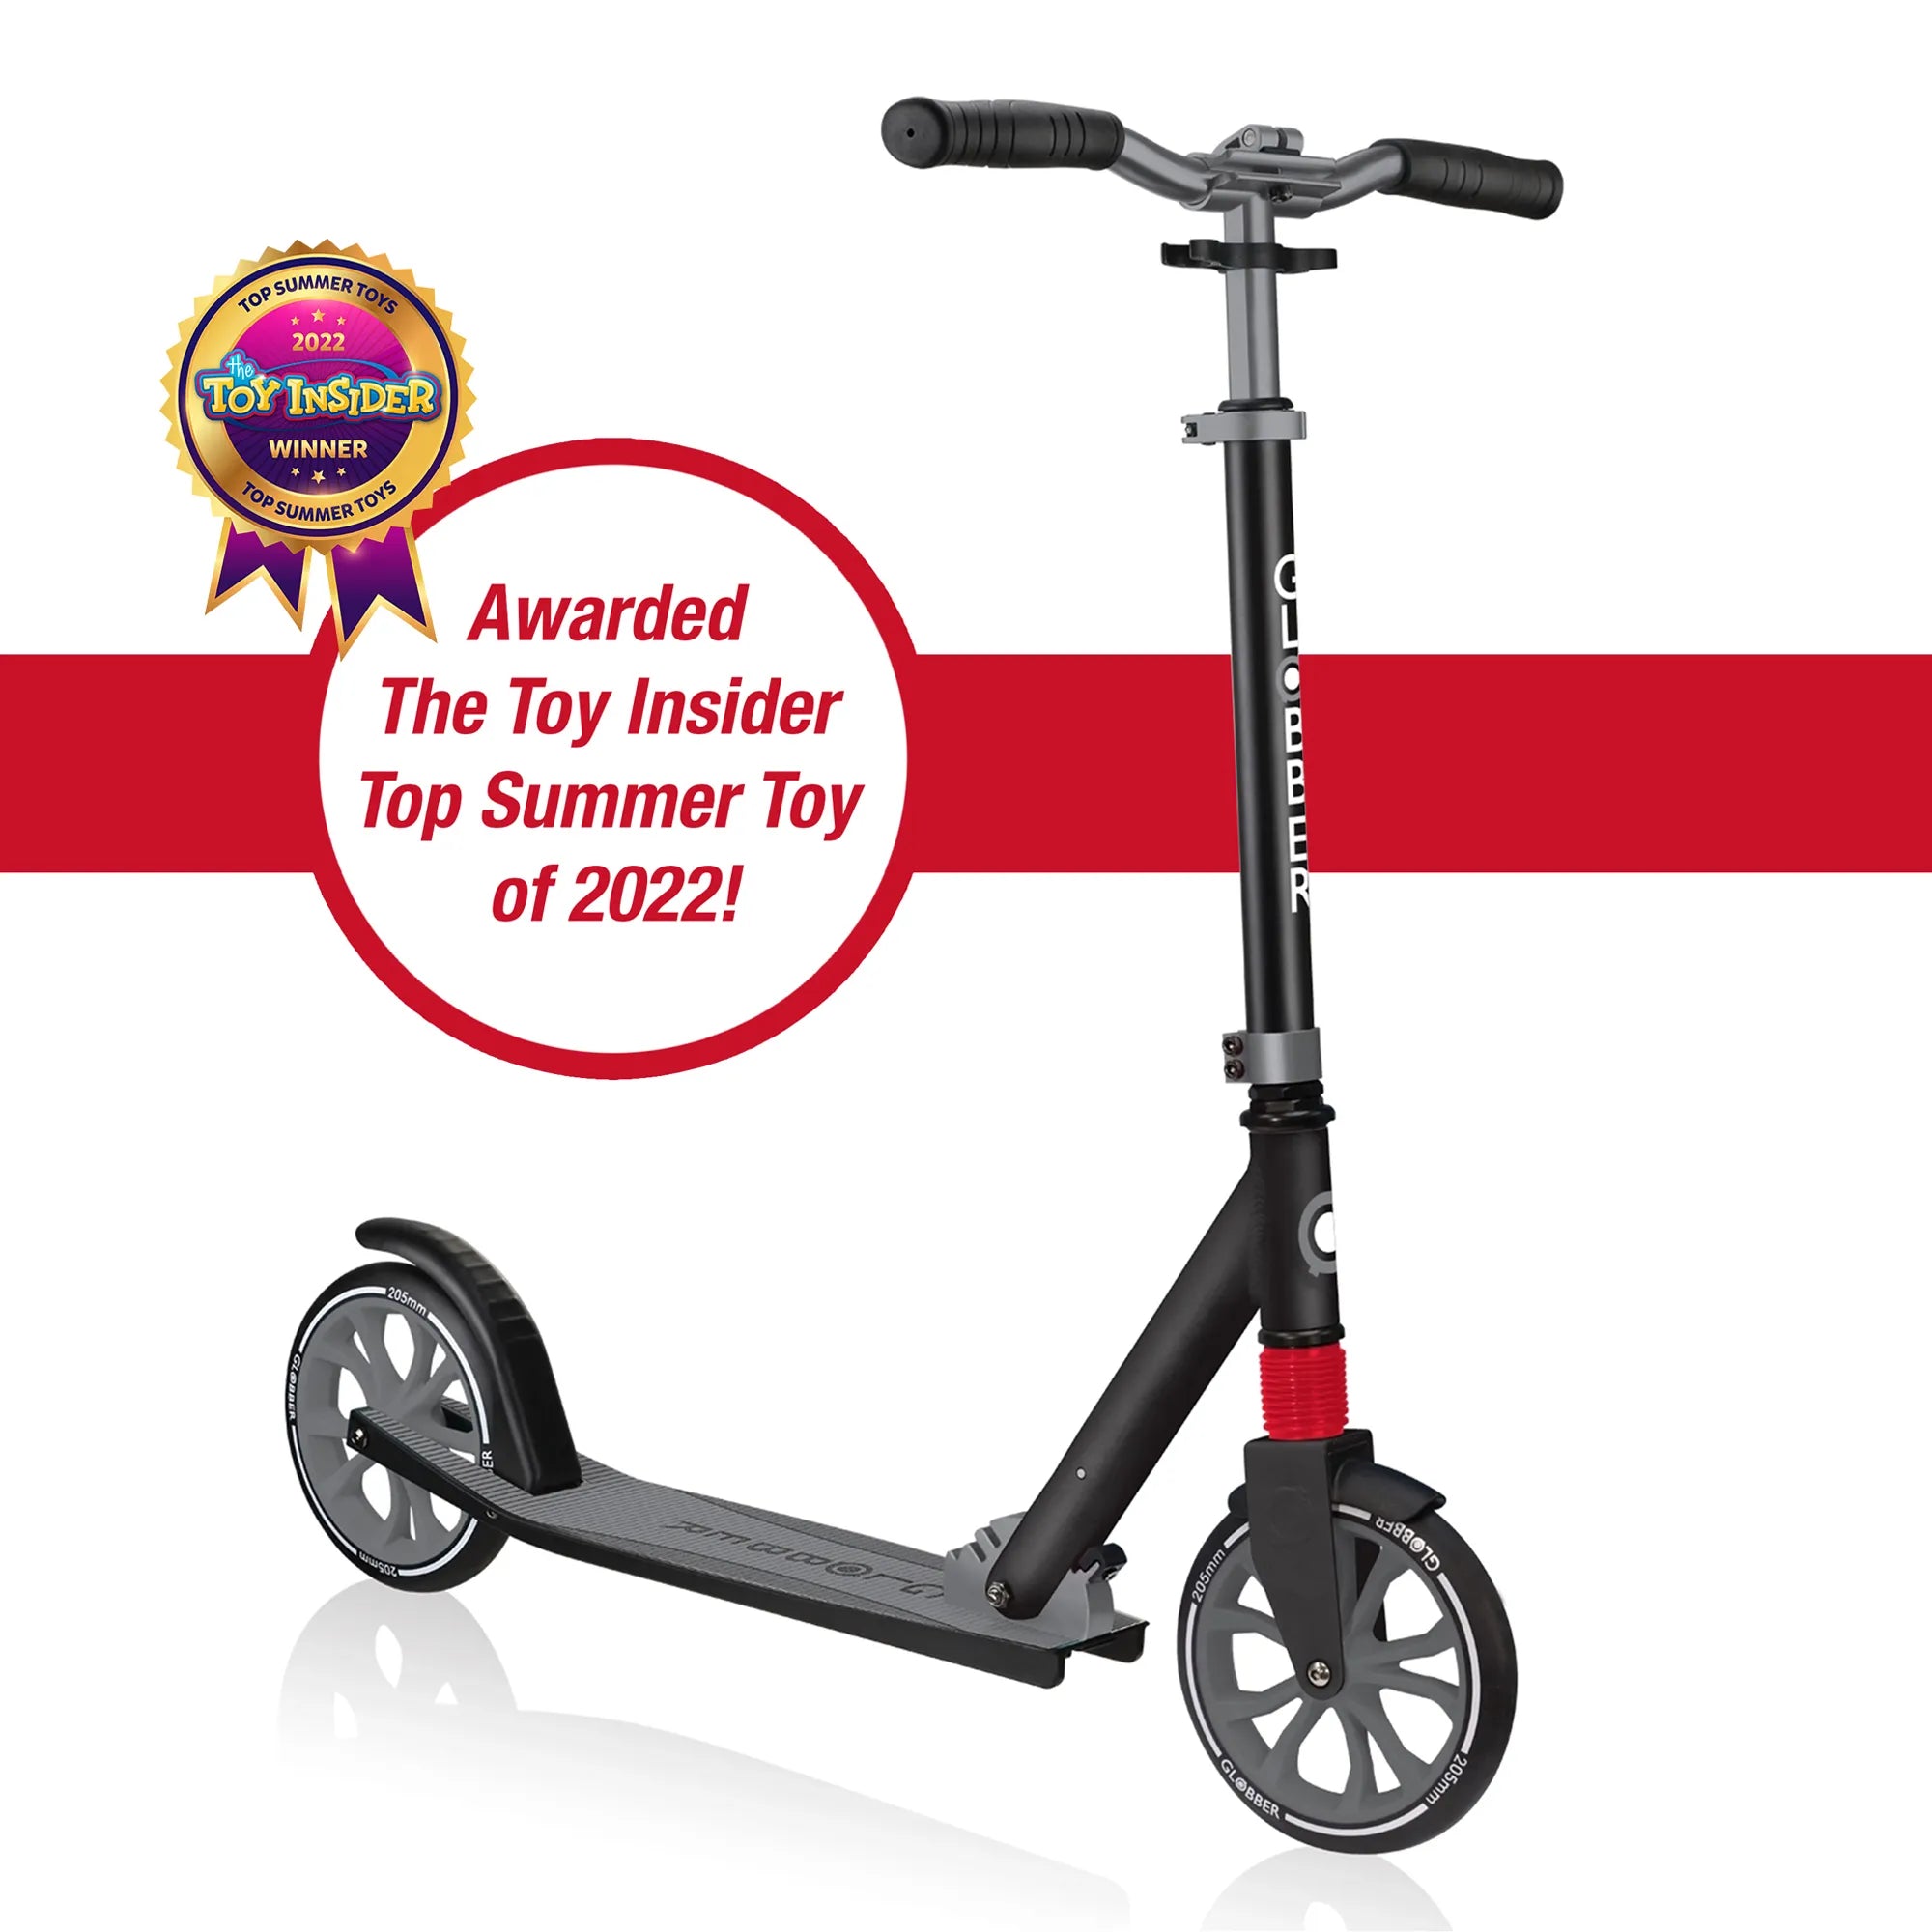 Globber NL 205 - Black & Grey - Award-Winning Scooter Ages 8-Adult - Brown's Hobby & Game